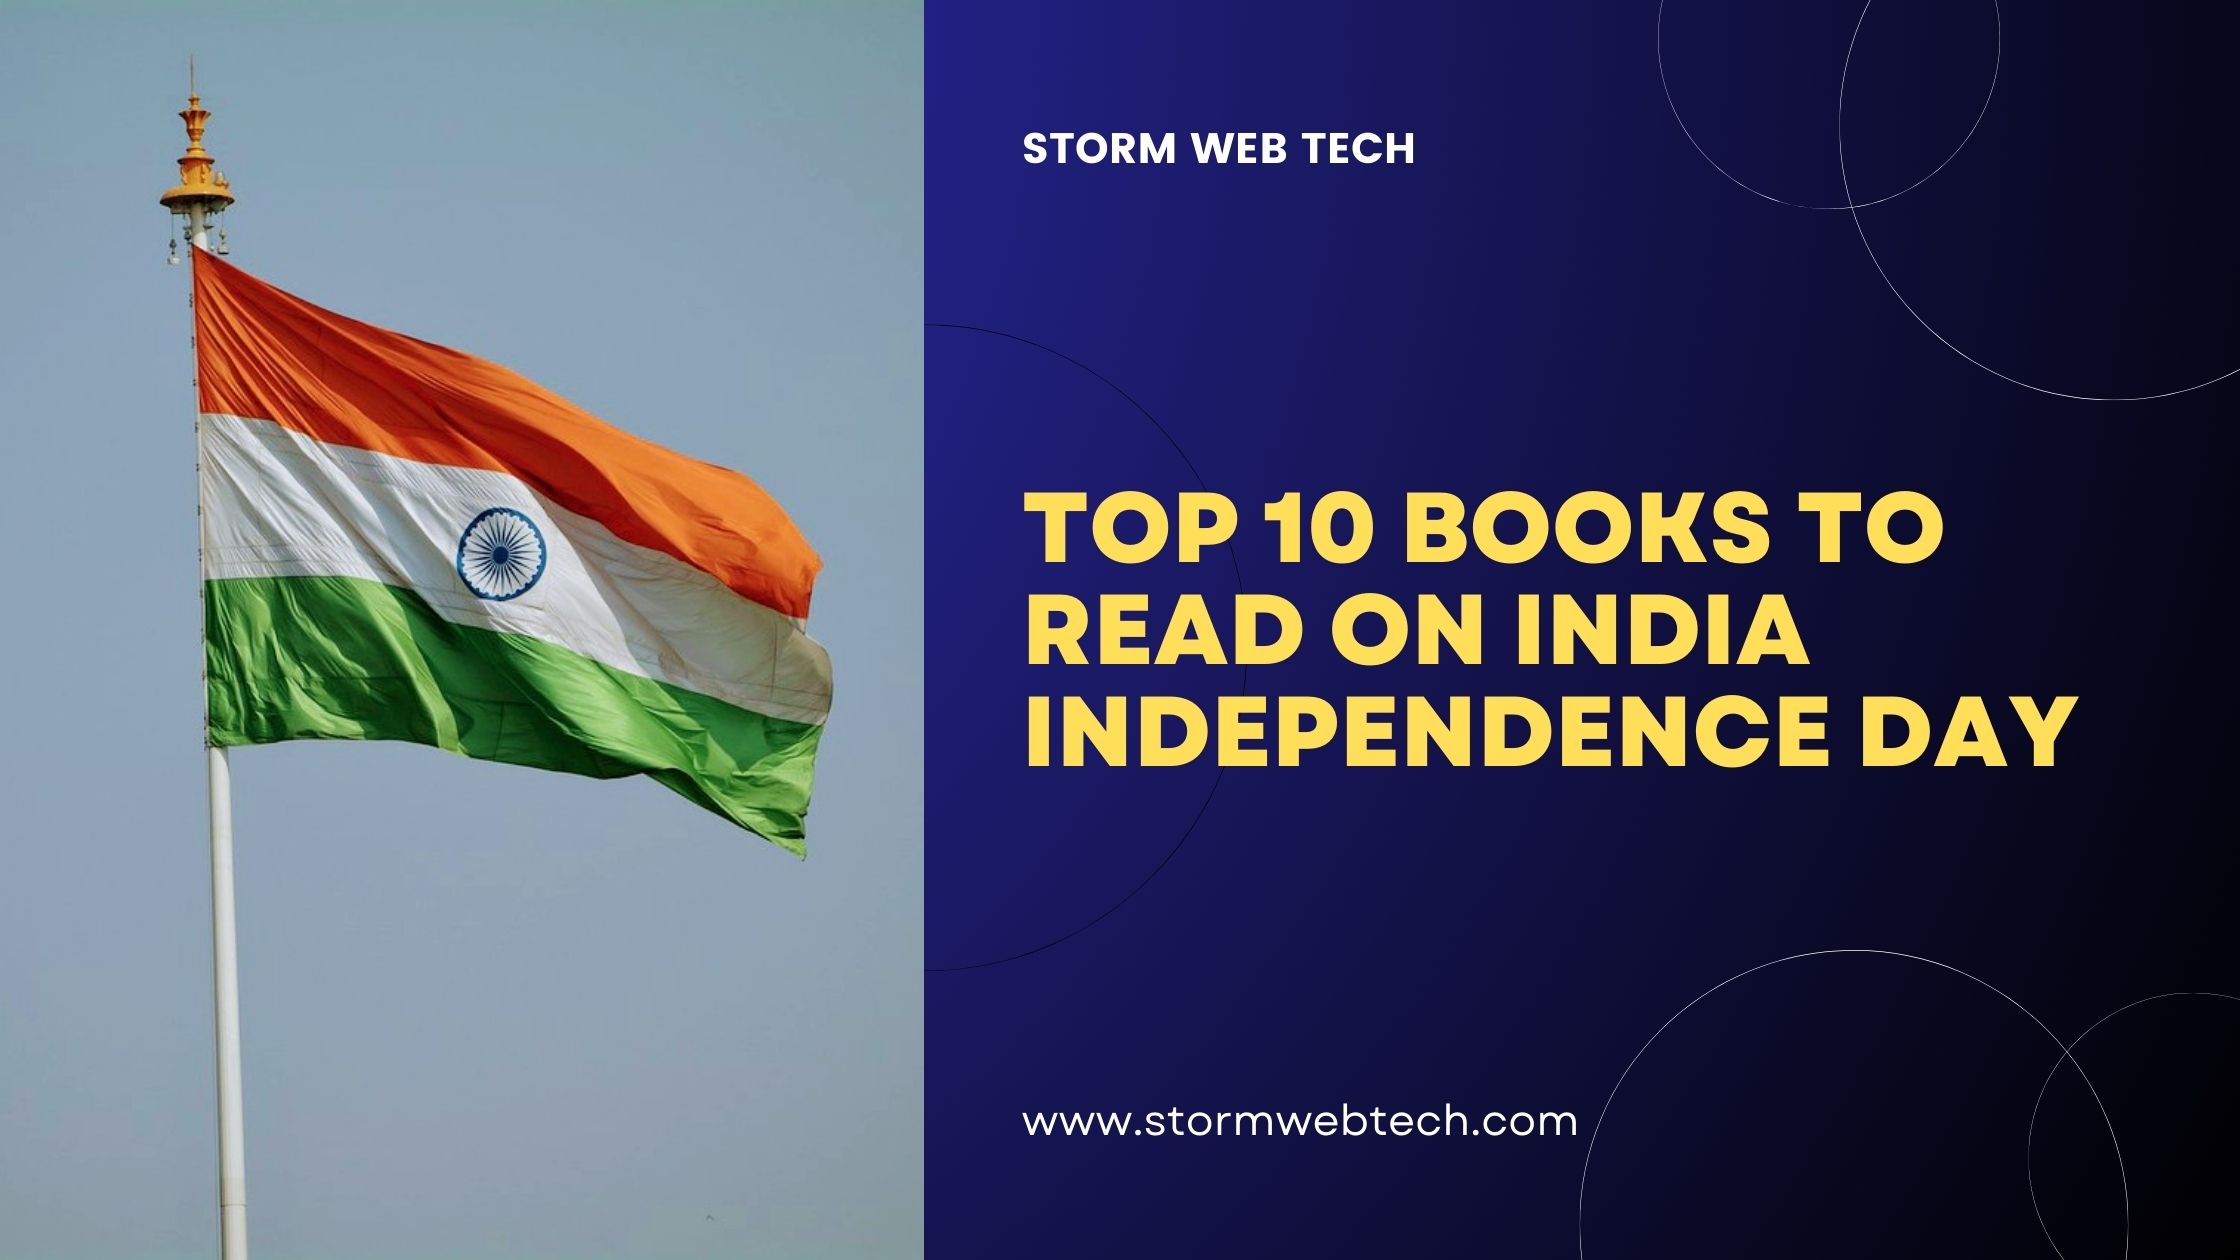 Top 10 Books to Read on India Independence Day that captures the essence of India's struggle, triumph, and ongoing journey towards progress